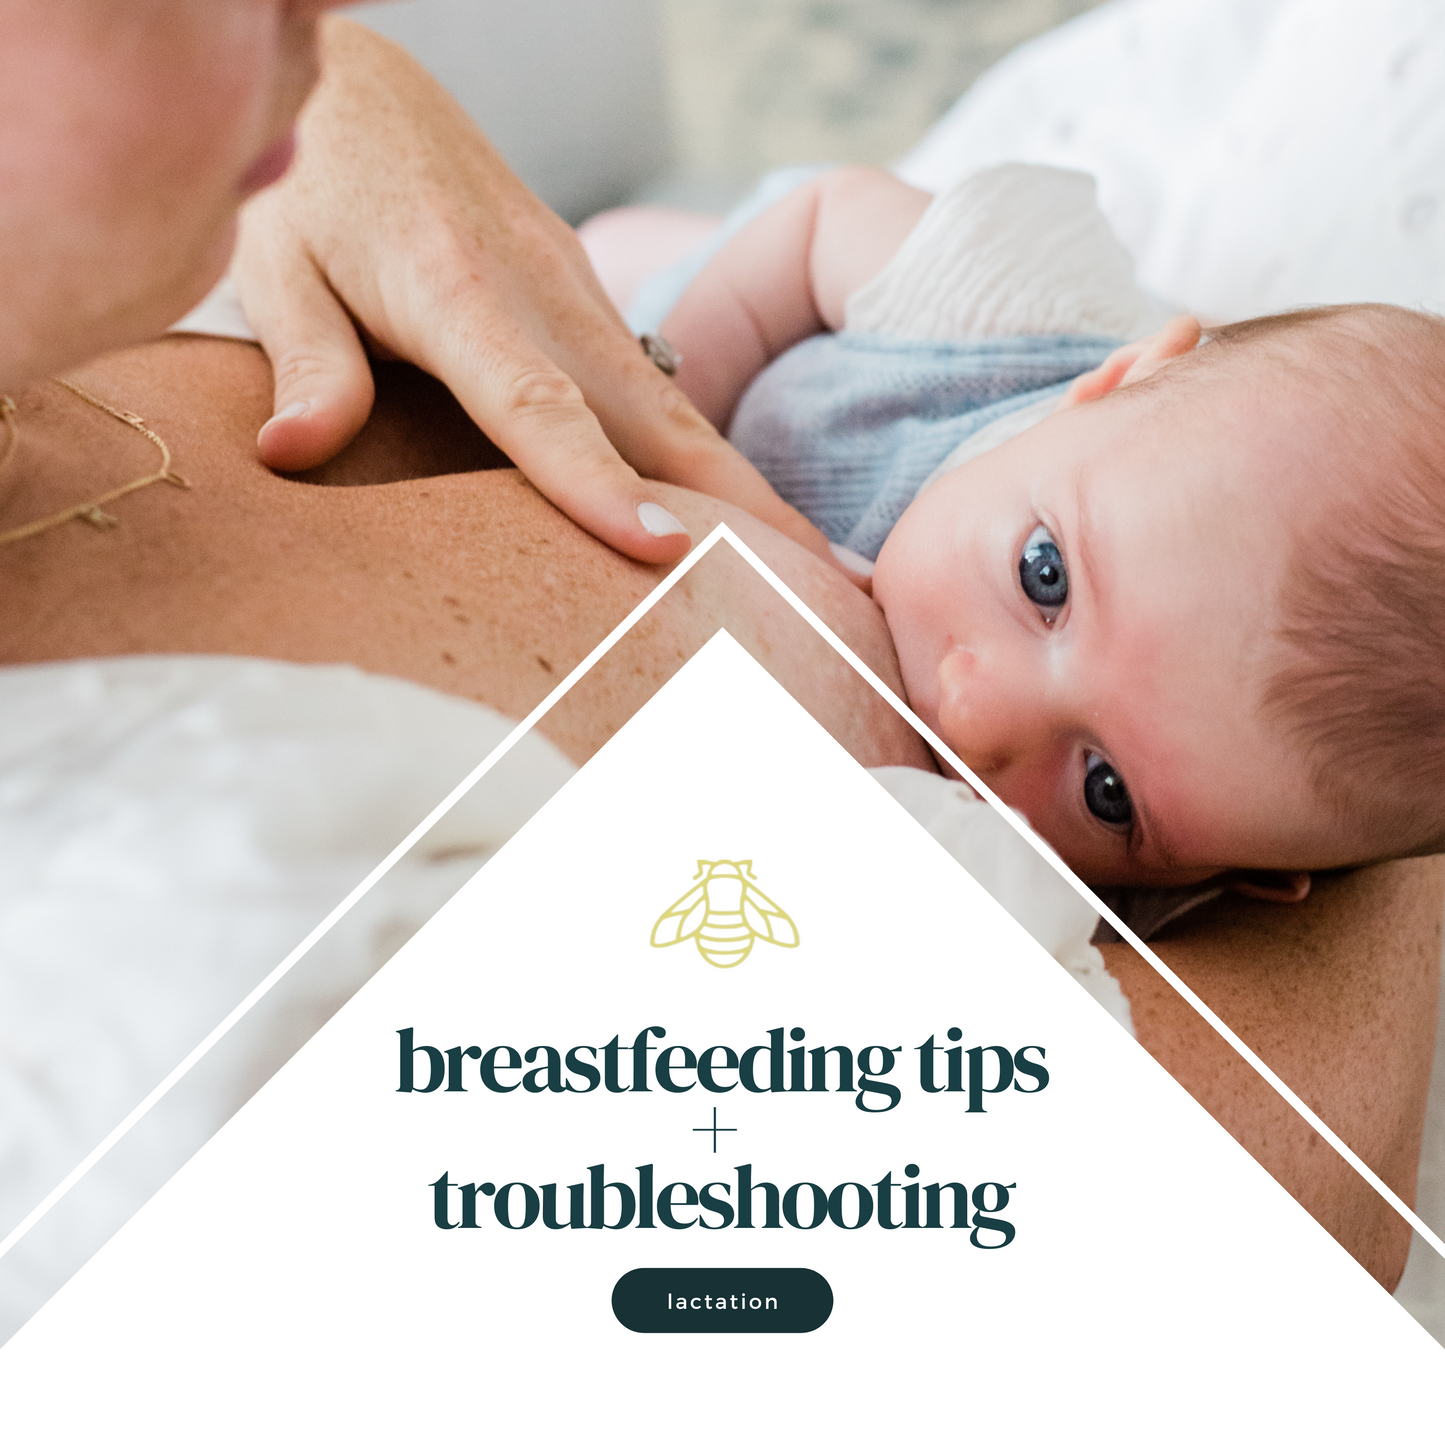 Breastfeeding tips + troubleshooting e-guide